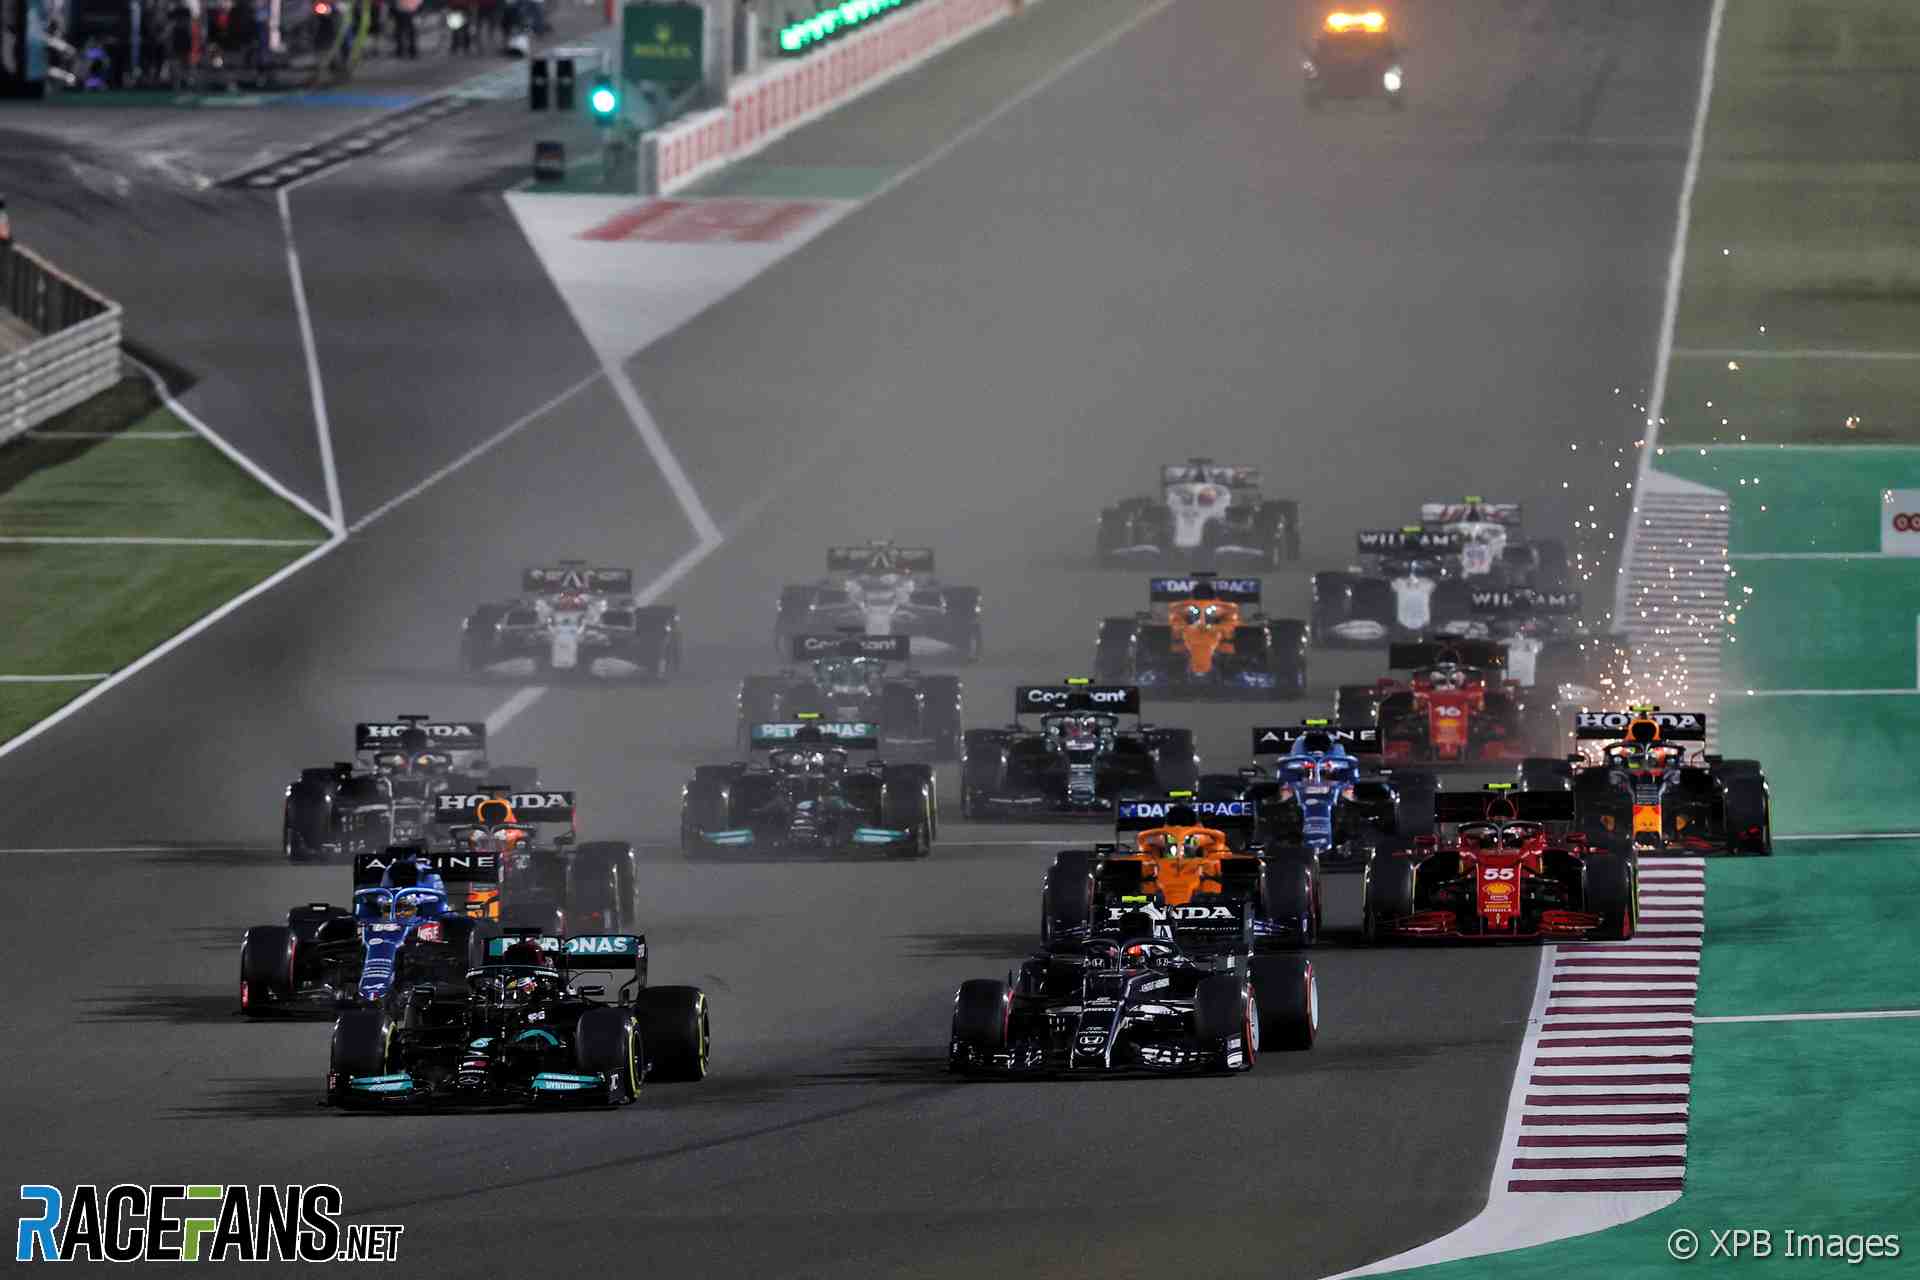 The Losail International Circuit will hold the Qatar Grand Prix for the second time in 2023